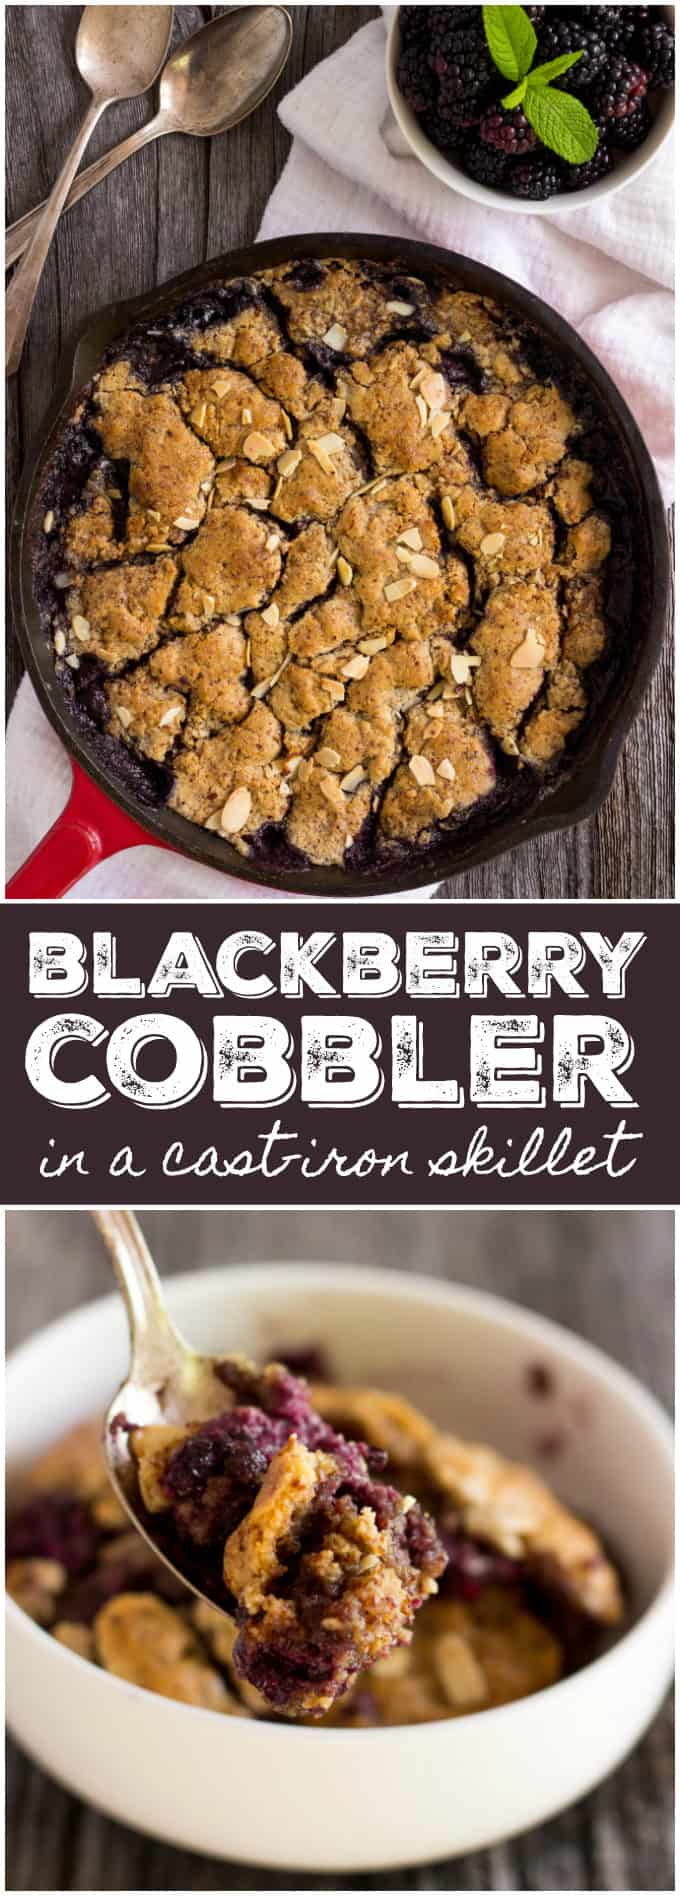 Blackberry Cobbler in a Cast-Iron Skillet - The closest you can get to the Old-Fashioned recipe while staying 100% healthy. 